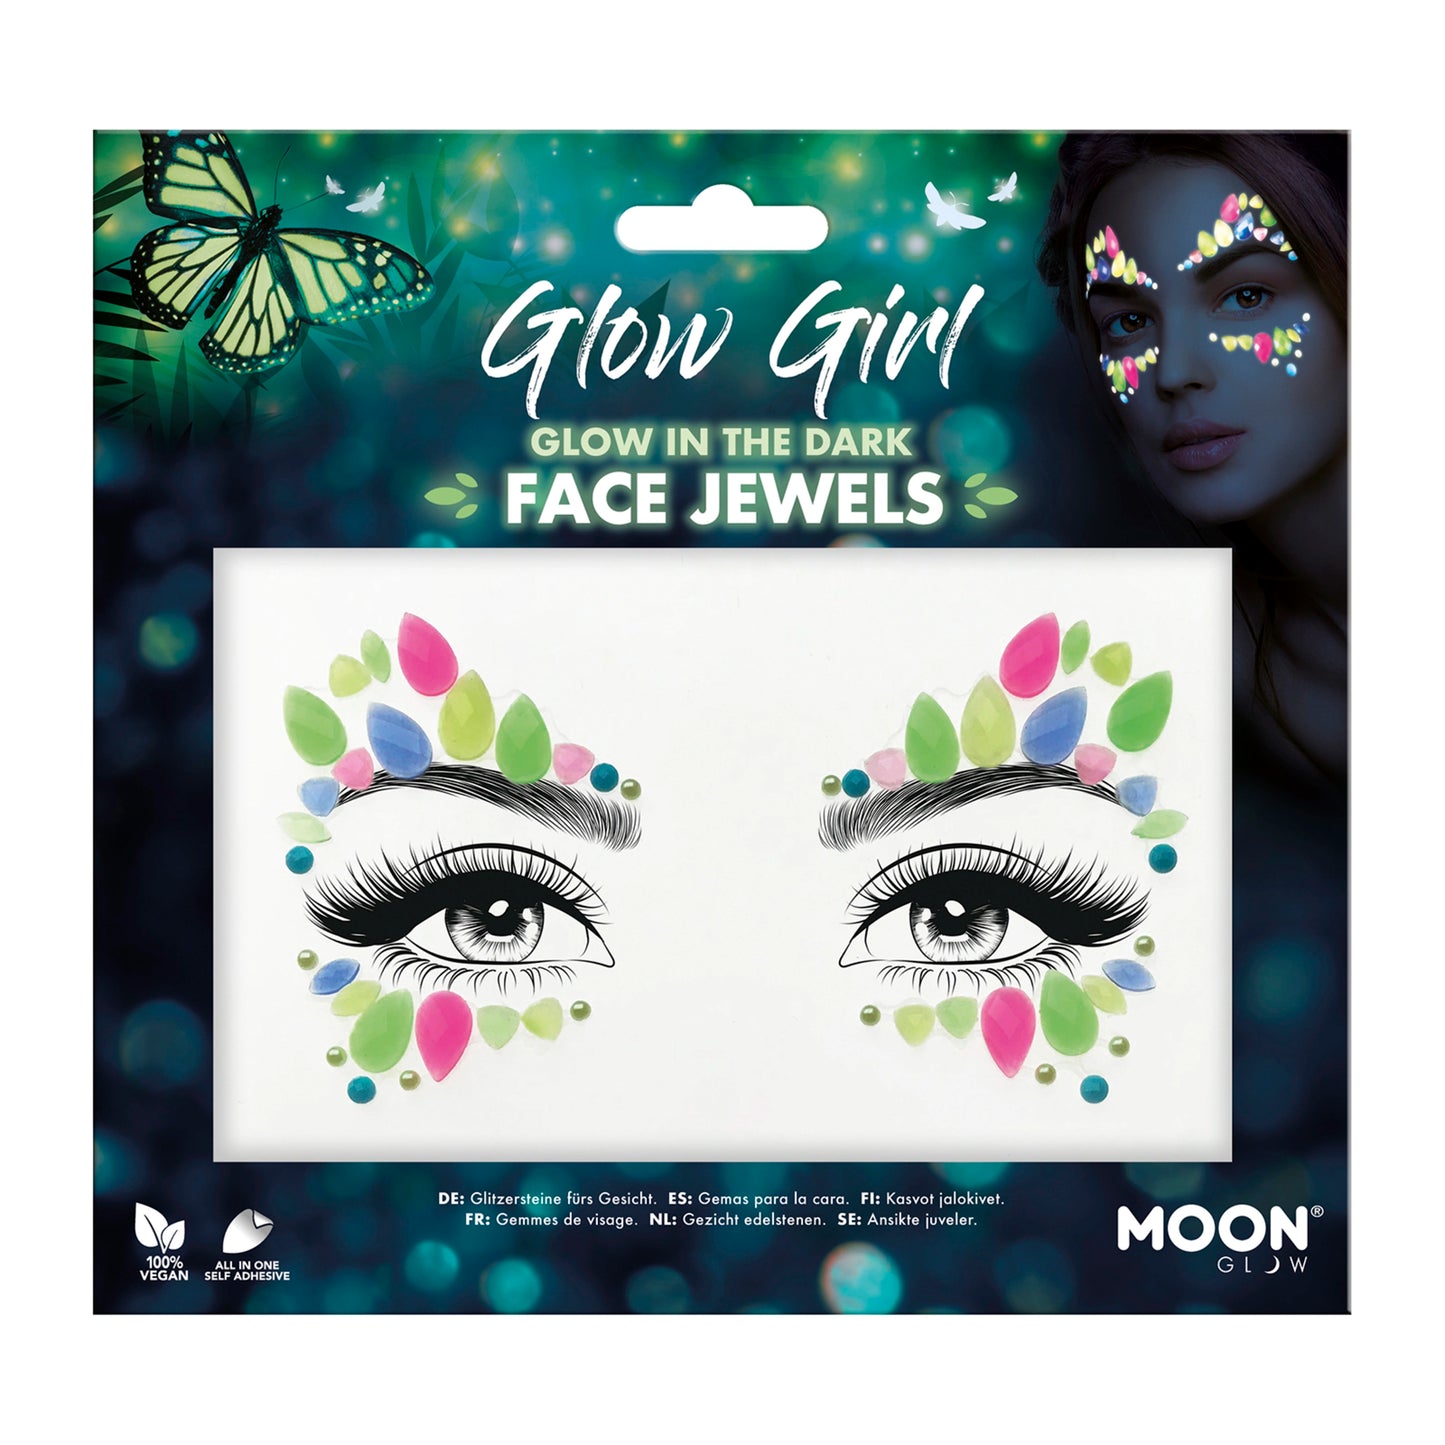 Glow in the Dark Face Jewels and Face Gems - Glow Girl